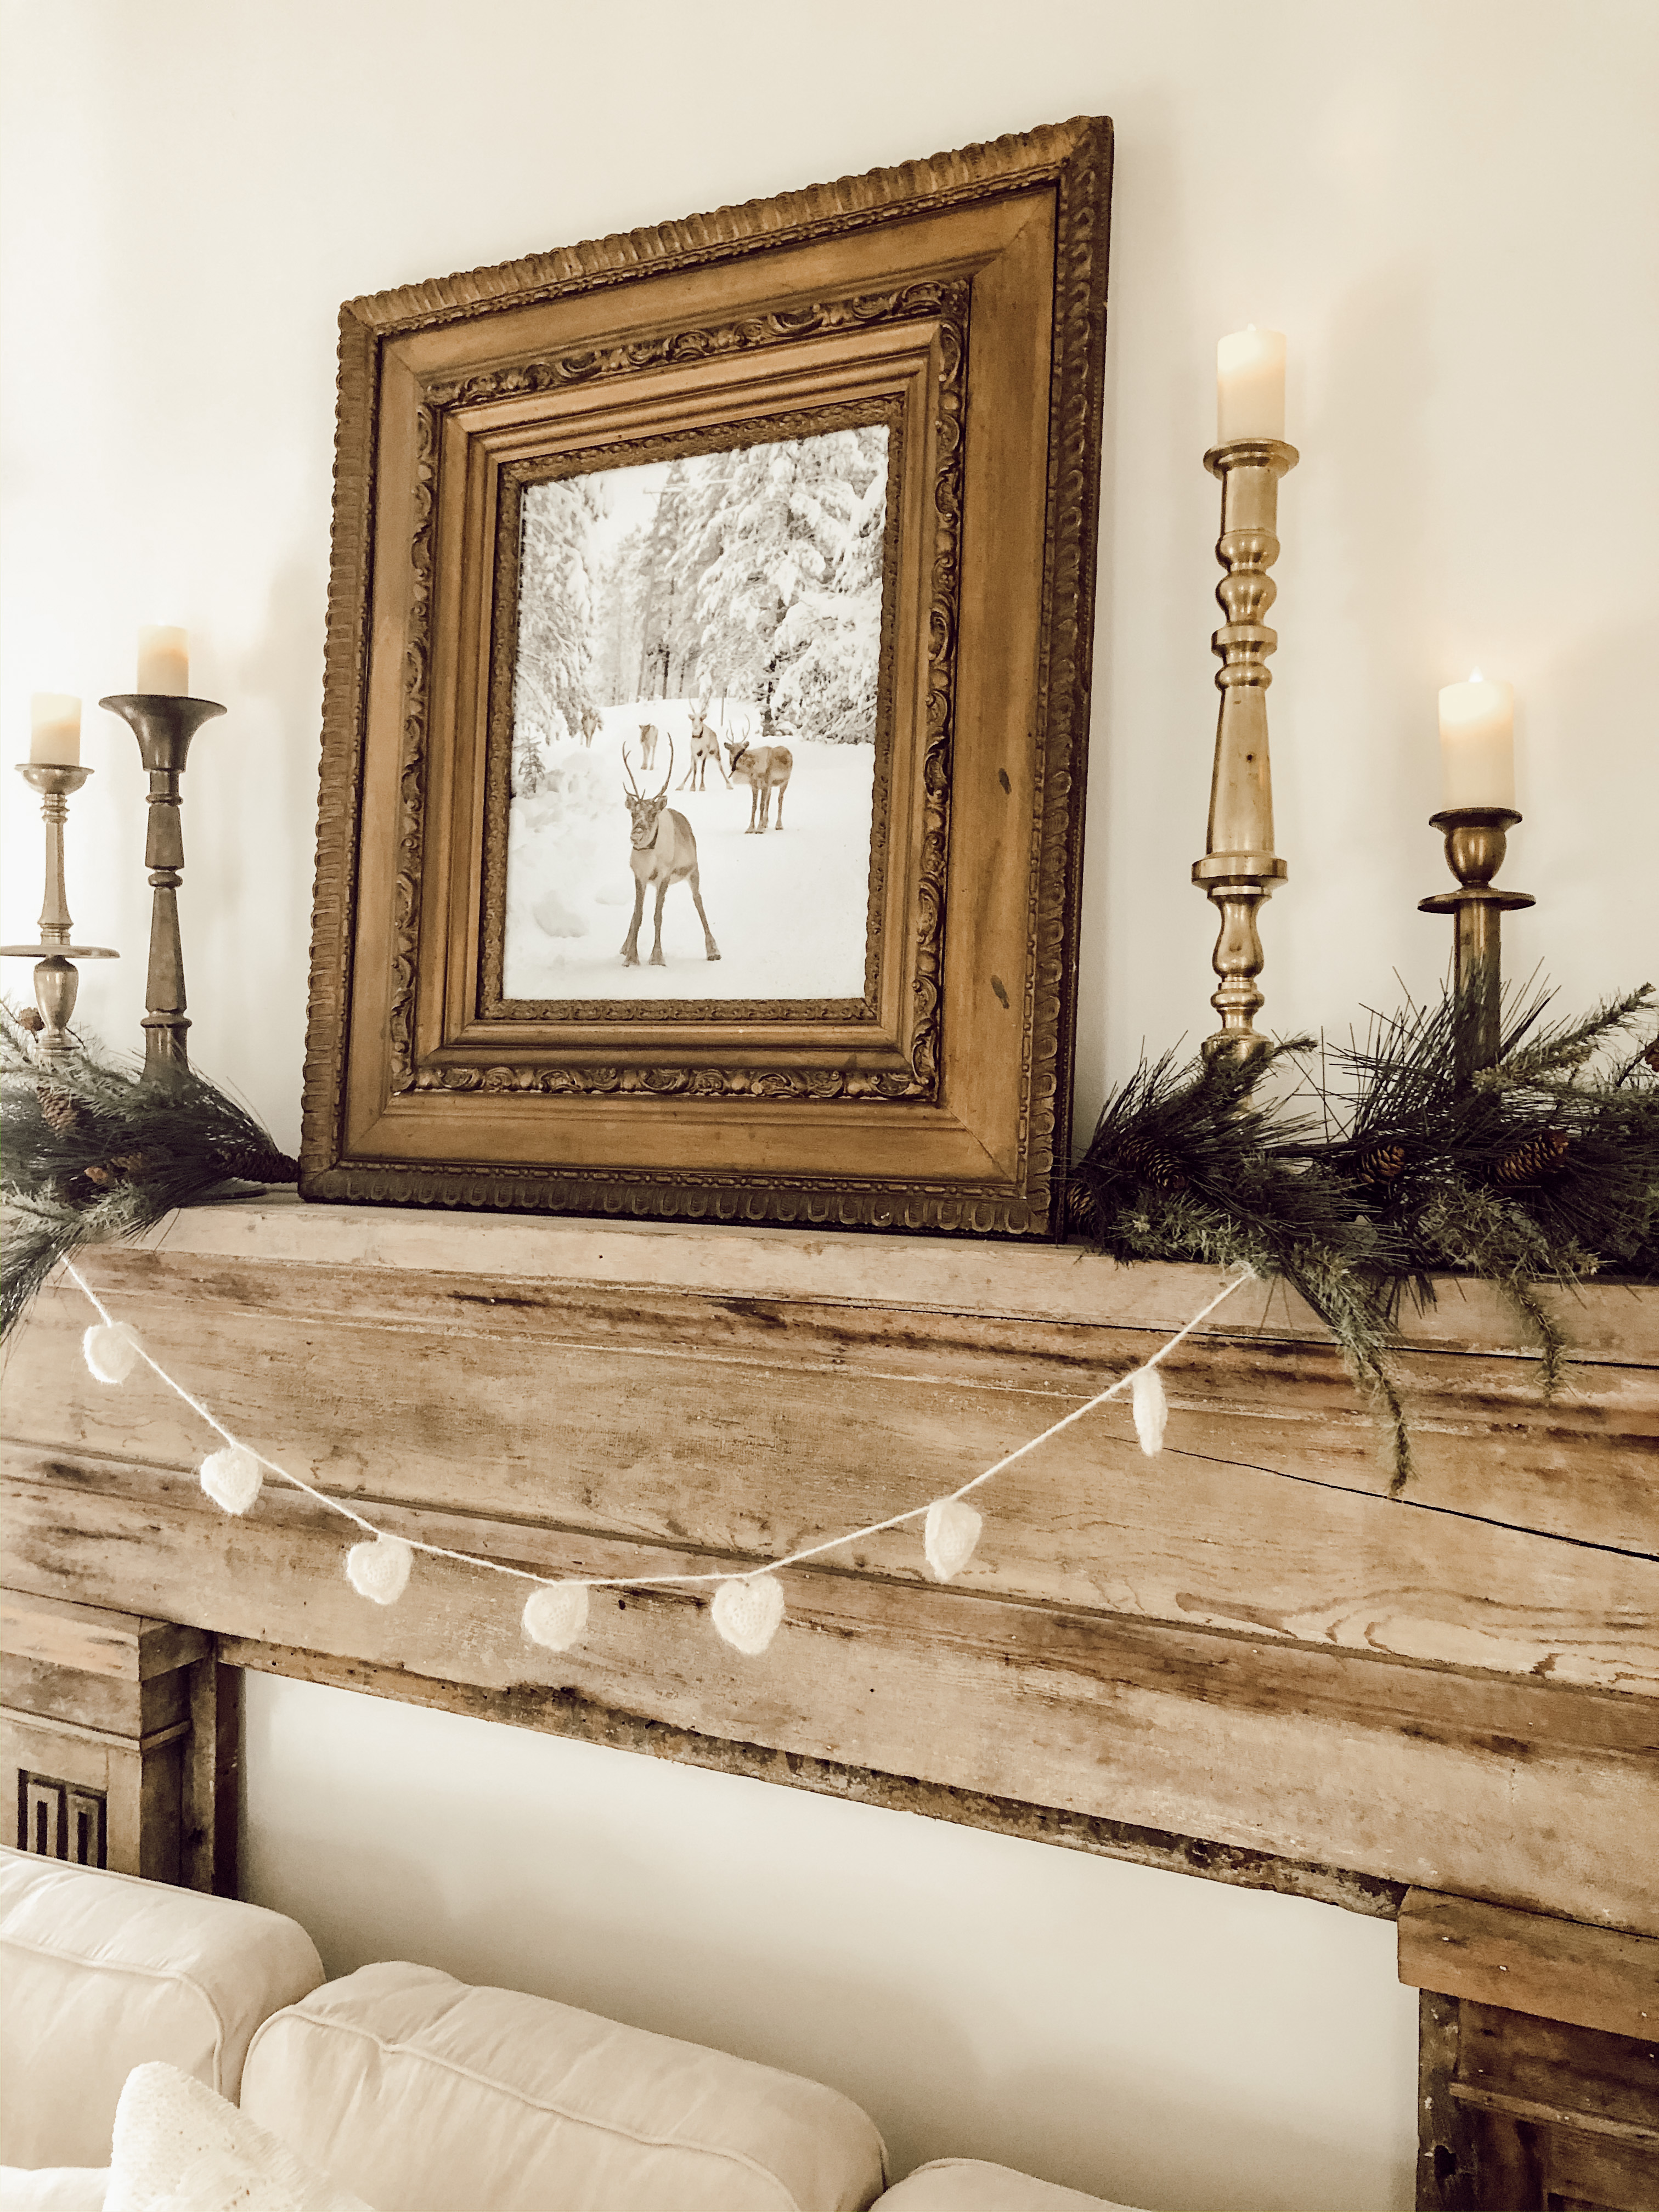 Antique Fireplace mantel and reindeer picture